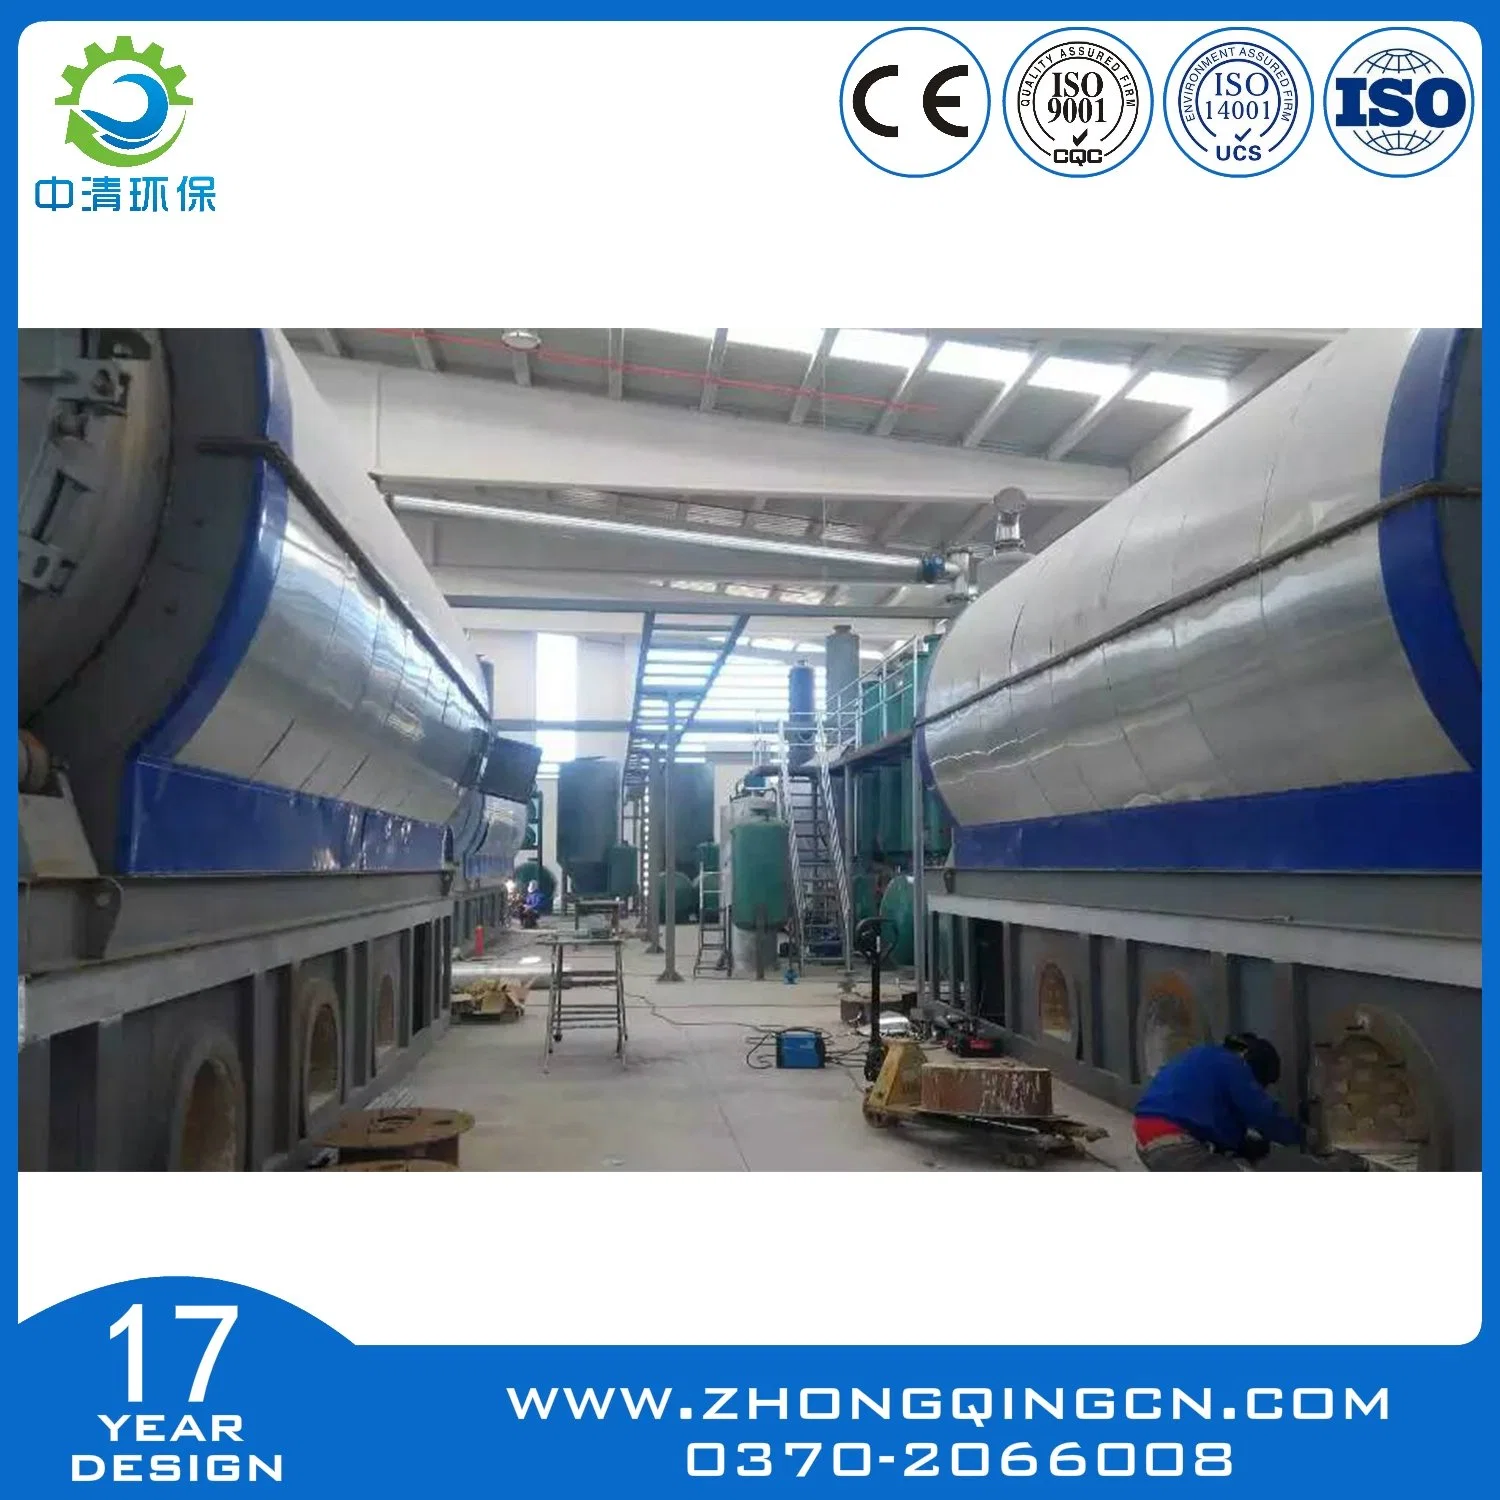 Environment-Friendly Waste Tire Recycling Machine/ Waste Tyre Recycling Plant/ Tyre Recycling Machine